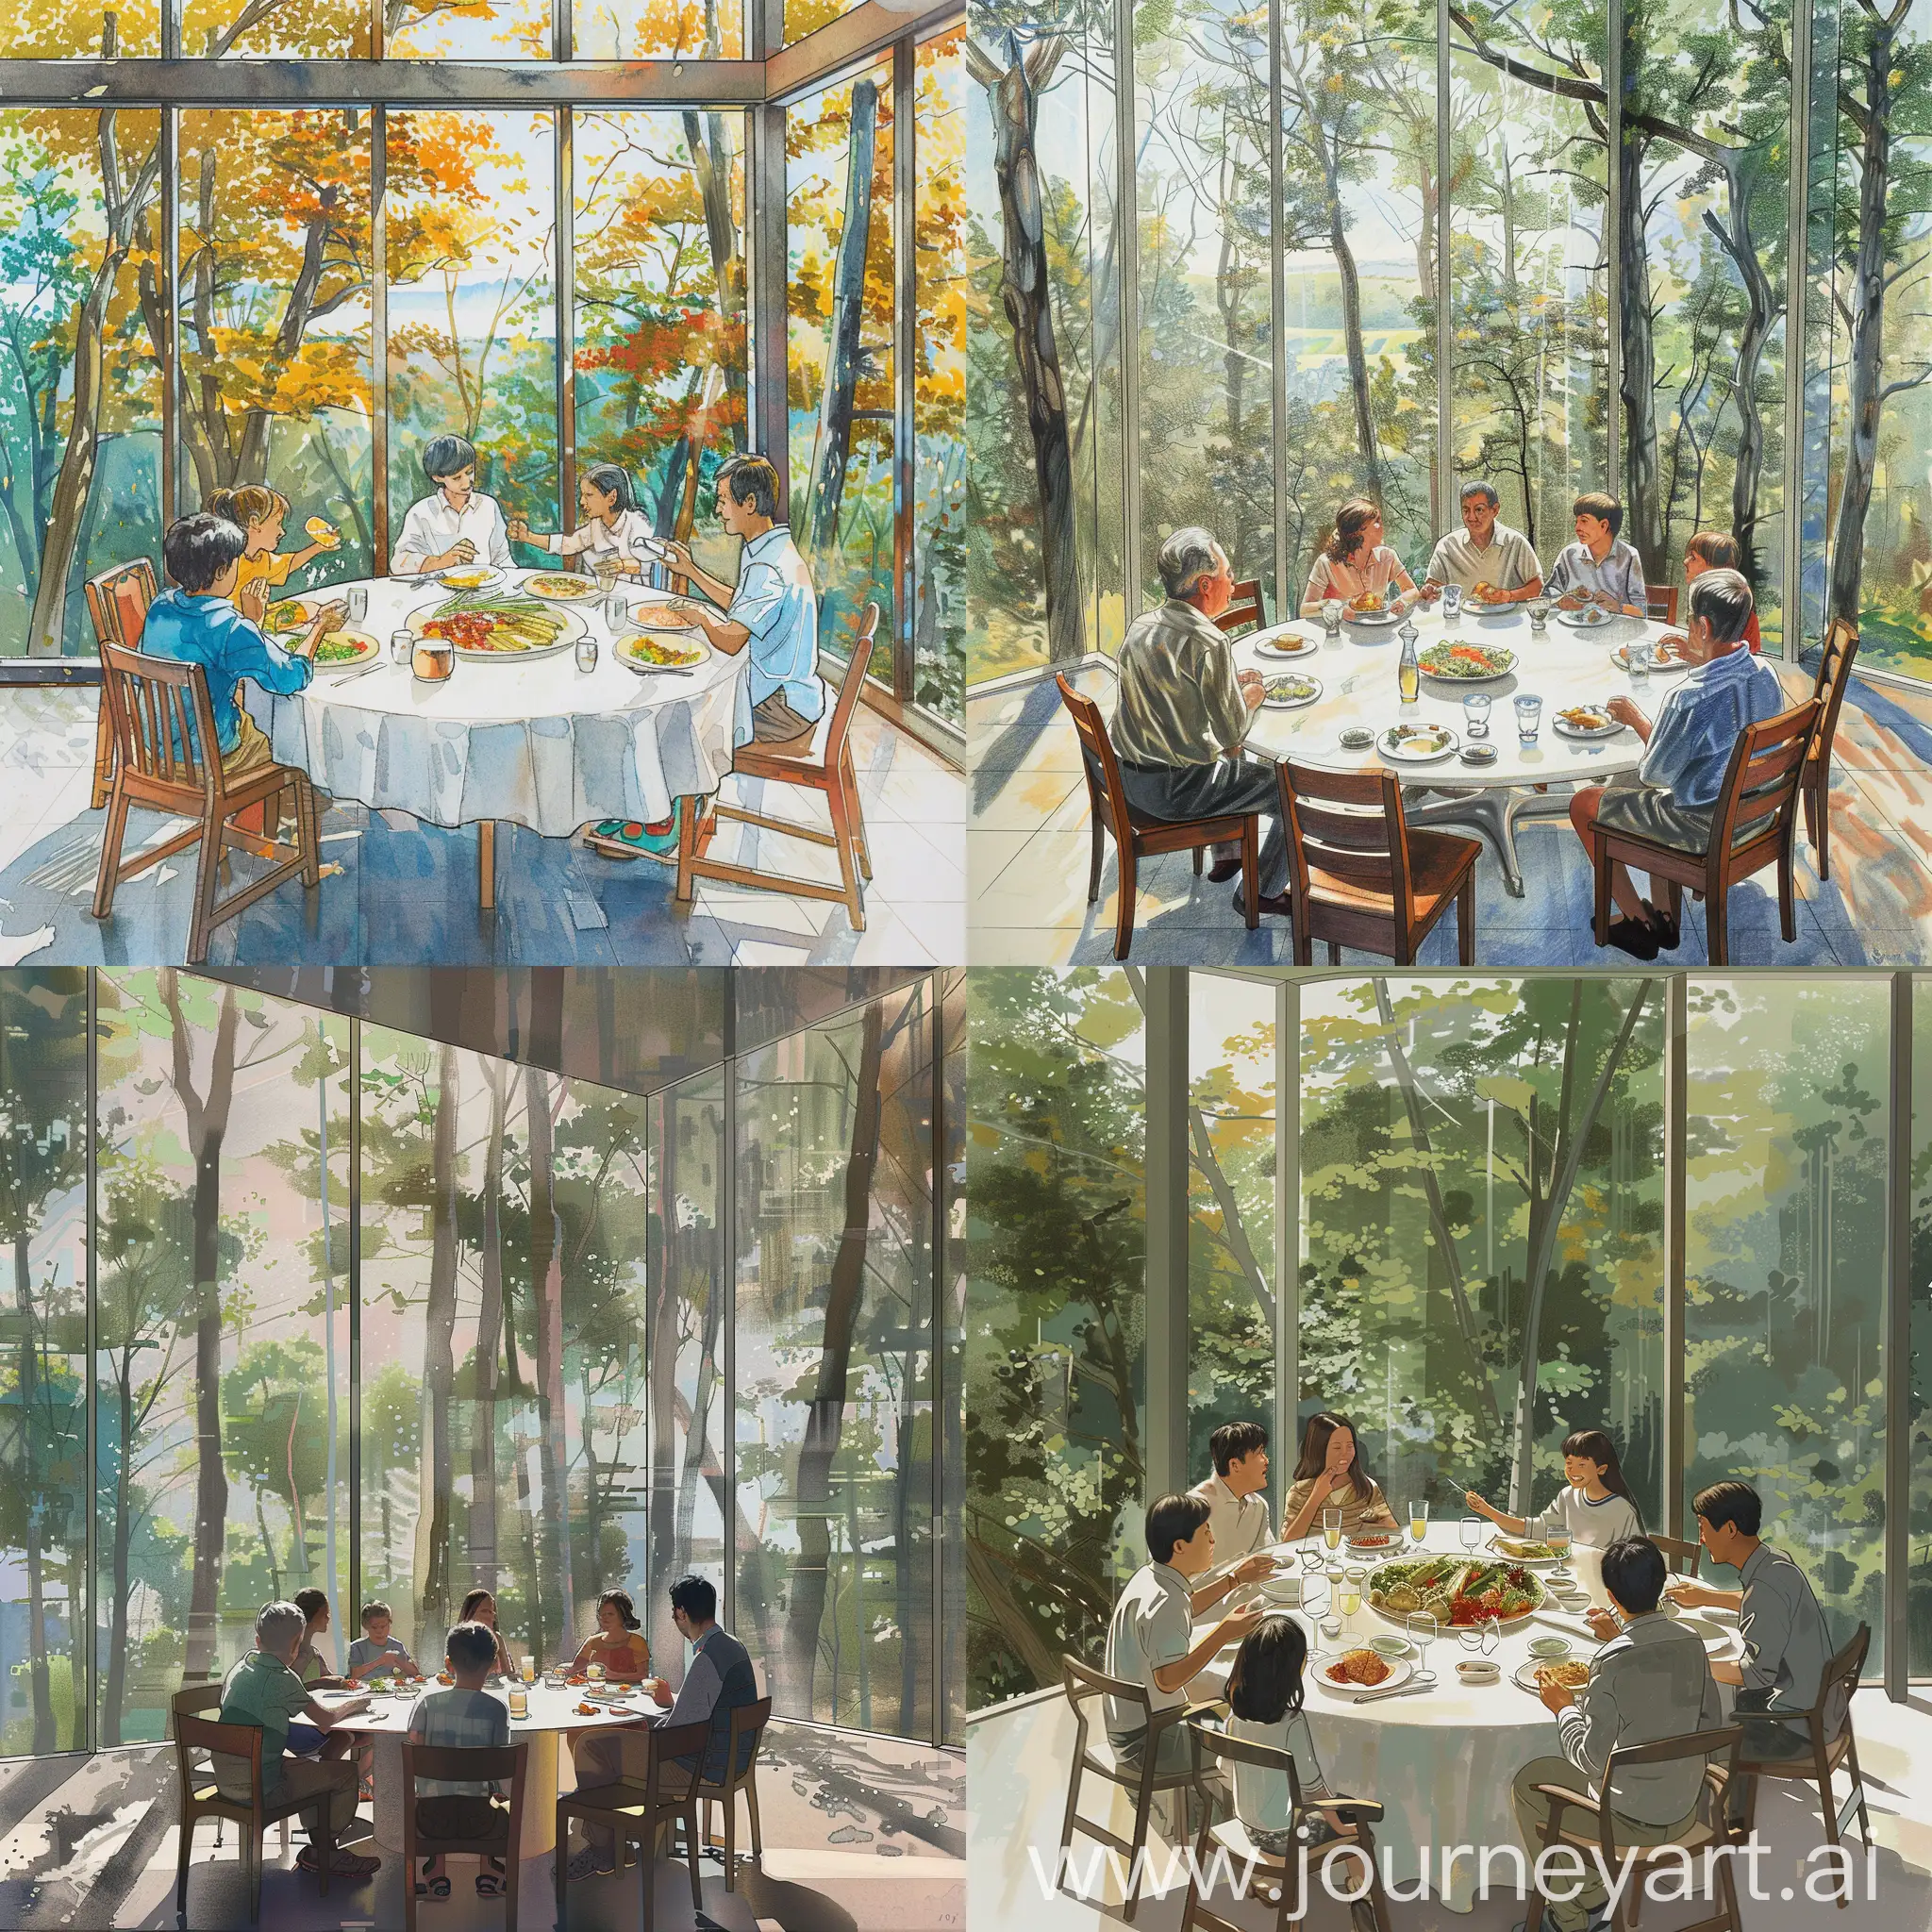 Draw a family of six eating dinner at a round white table in front of floor to ceiling windows overlooking lots of trees. The family of six comprises dad, mom, 18 year old boy, 16 year old girl, 14 year old boy and 11 year old girl. 